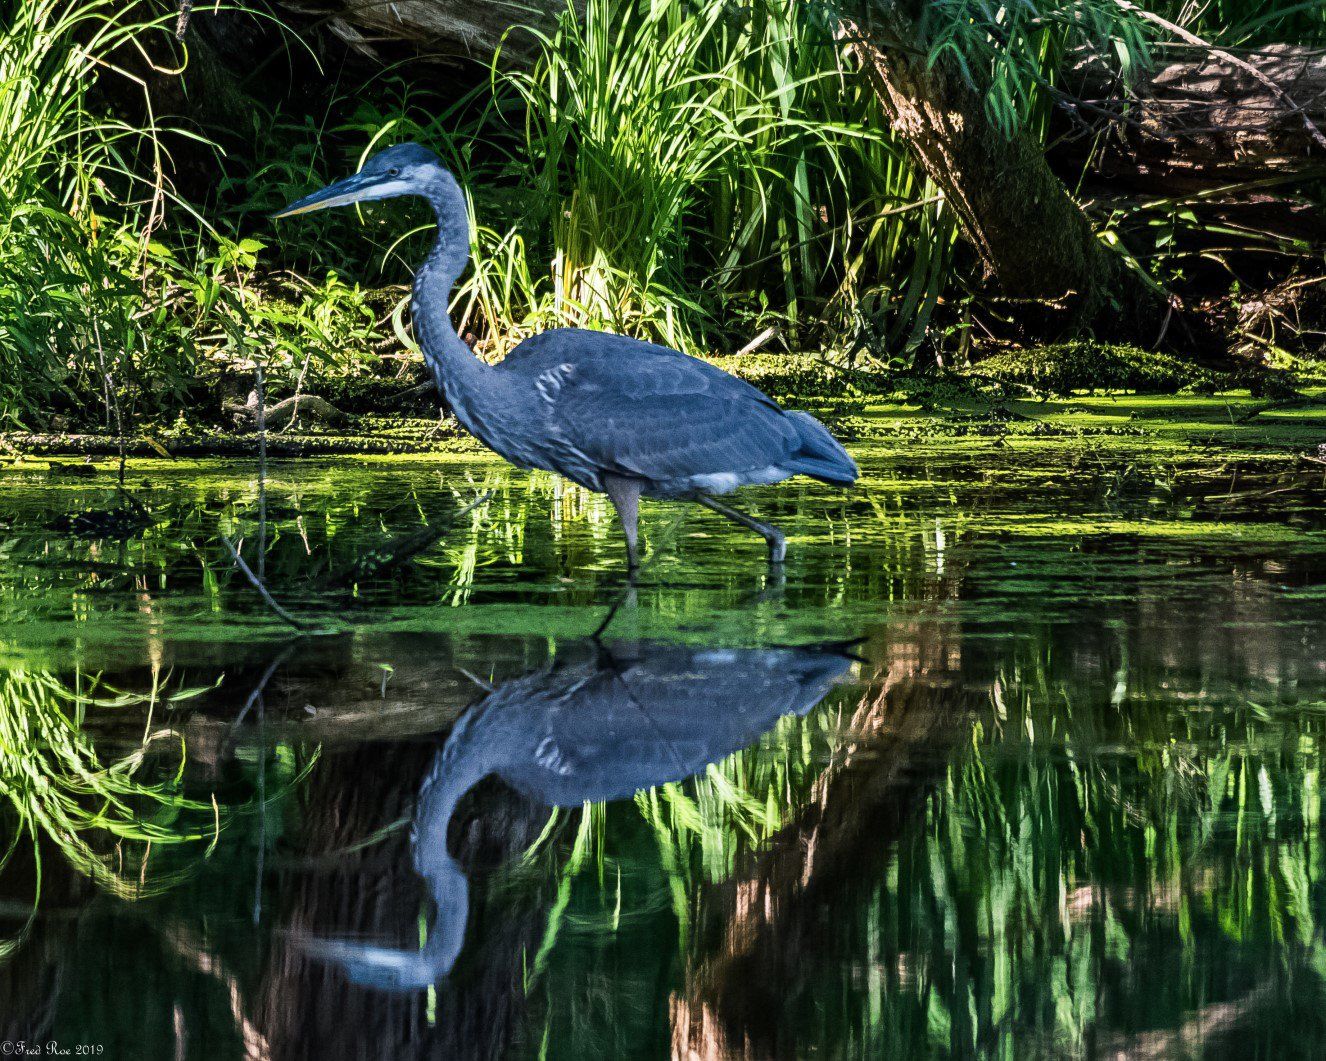 A blue heron is standing in the water near a tree.